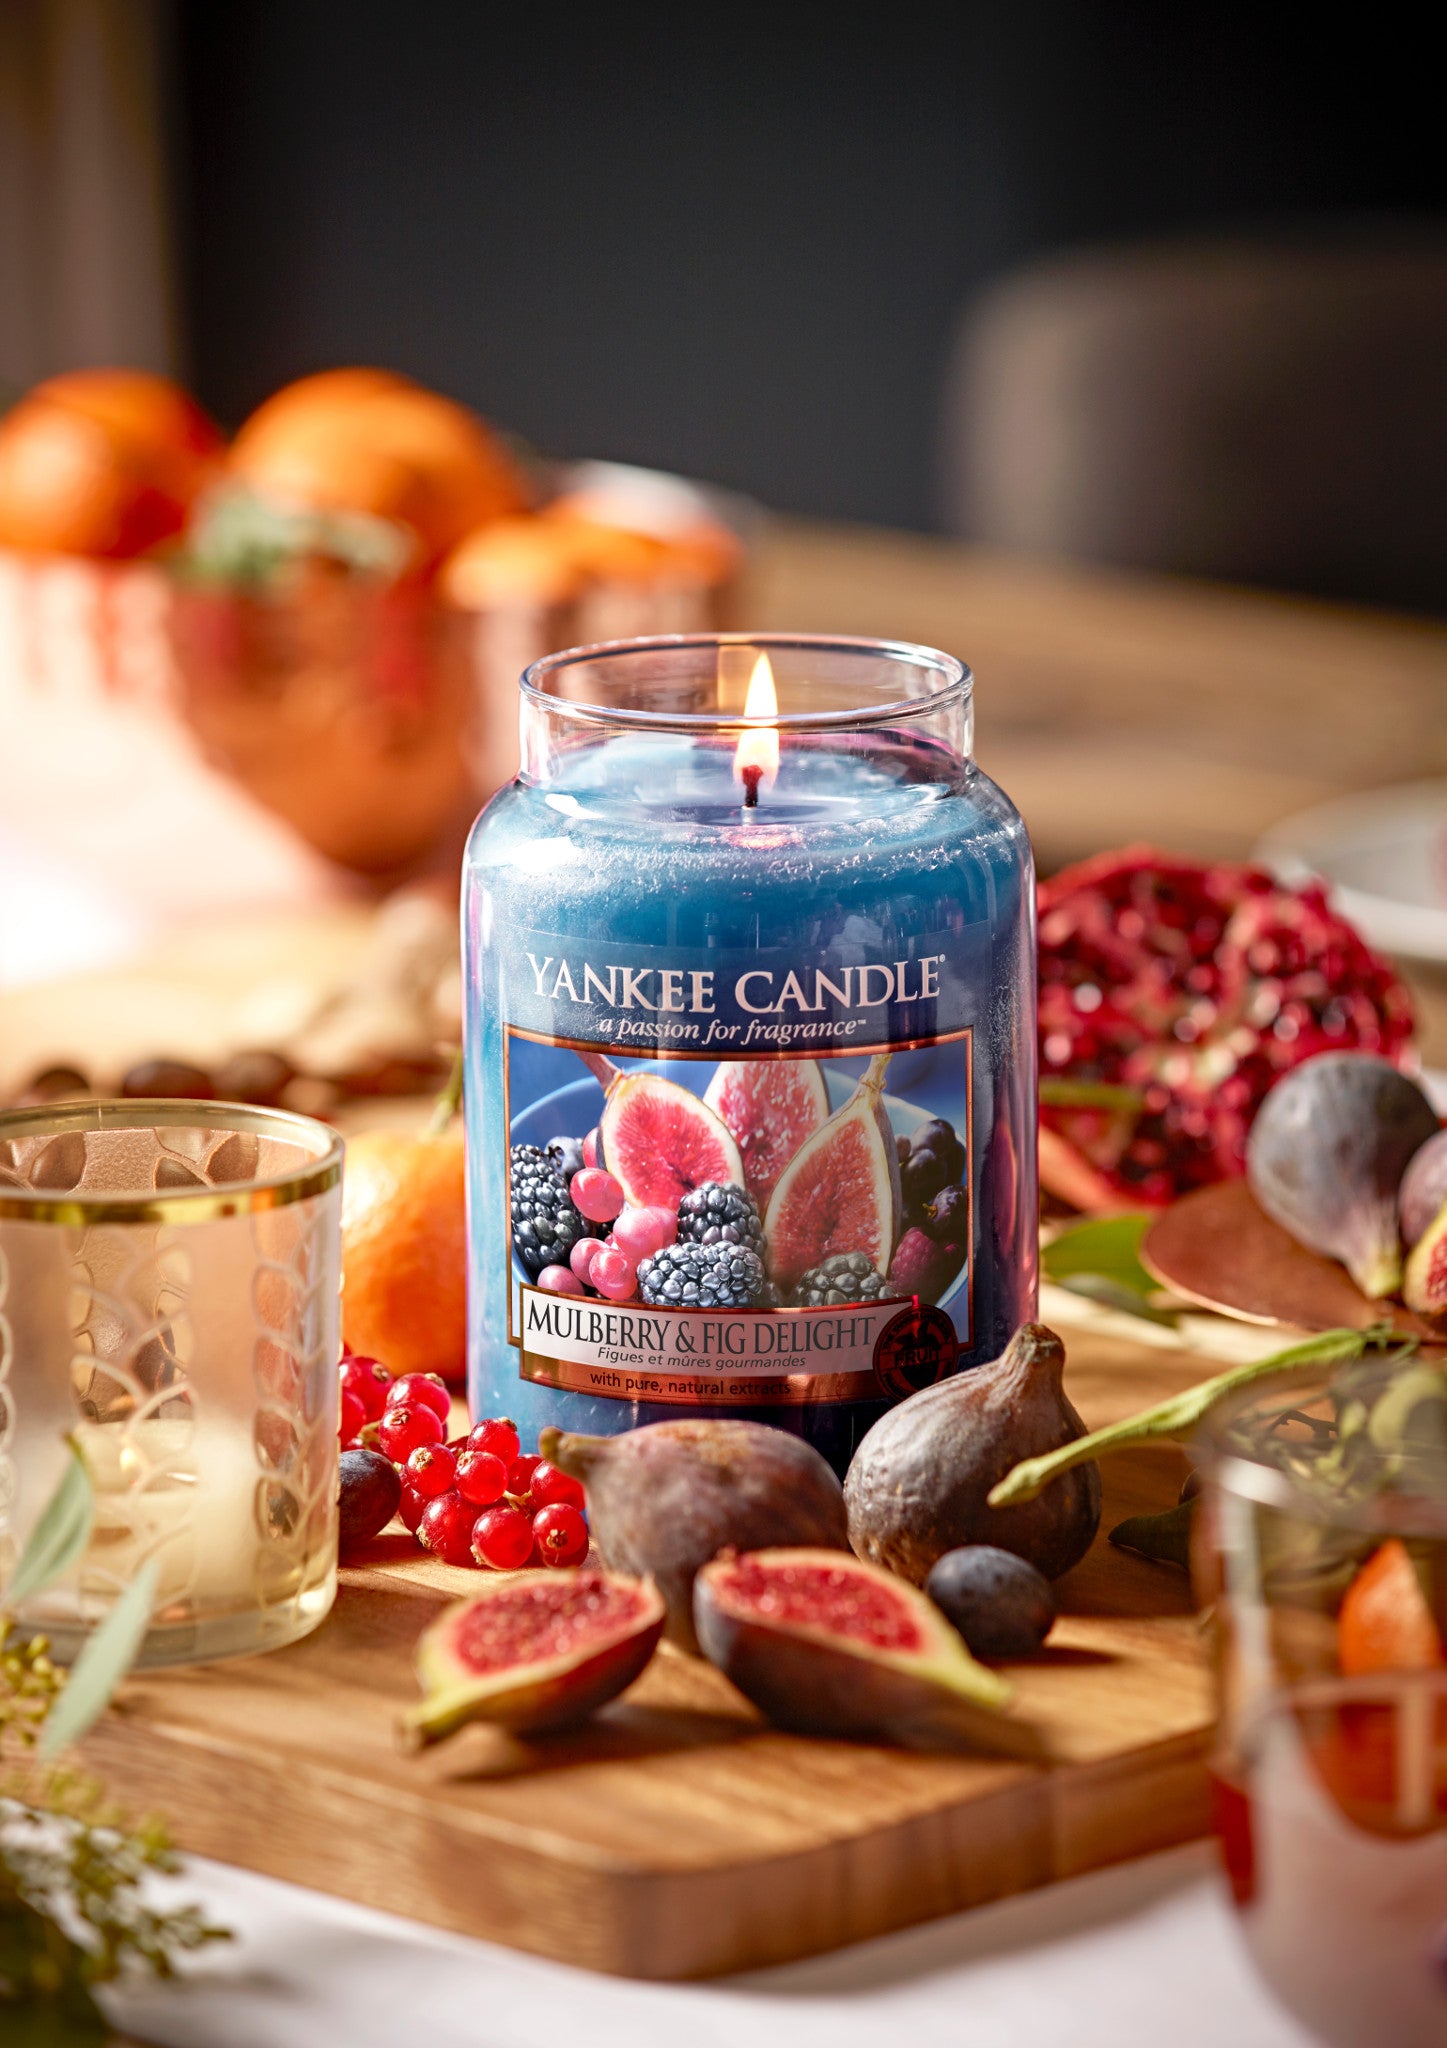 MULBERRY & FIG DELIGHT -Yankee Candle- Giara Piccola